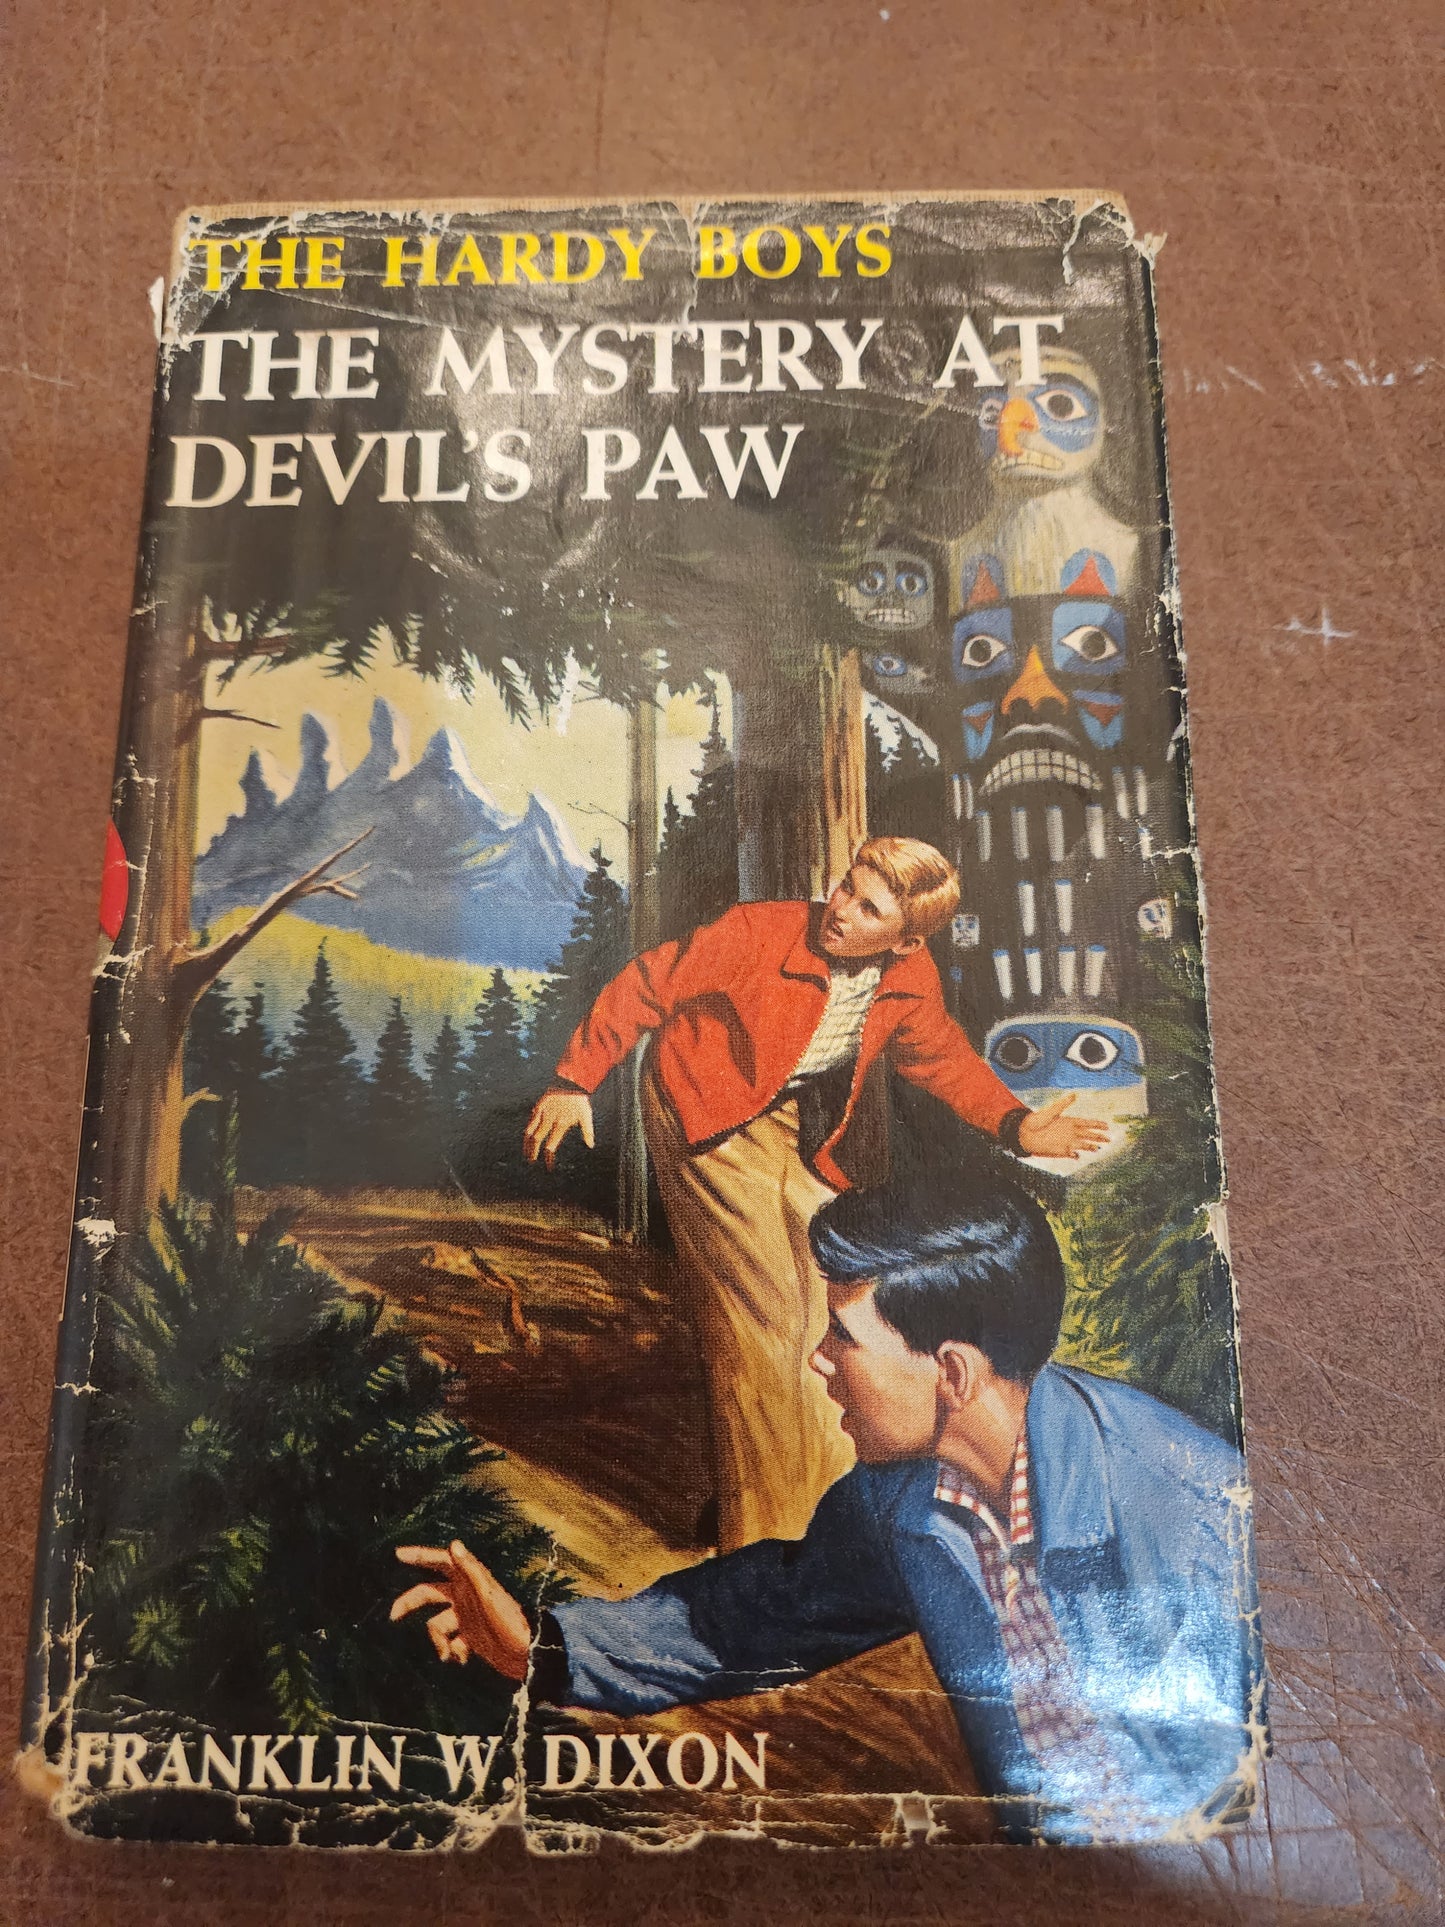 Hardy Boys, The Mystery at Devil's Paw, Franklin W Dixon, First Edition 1959 A-1